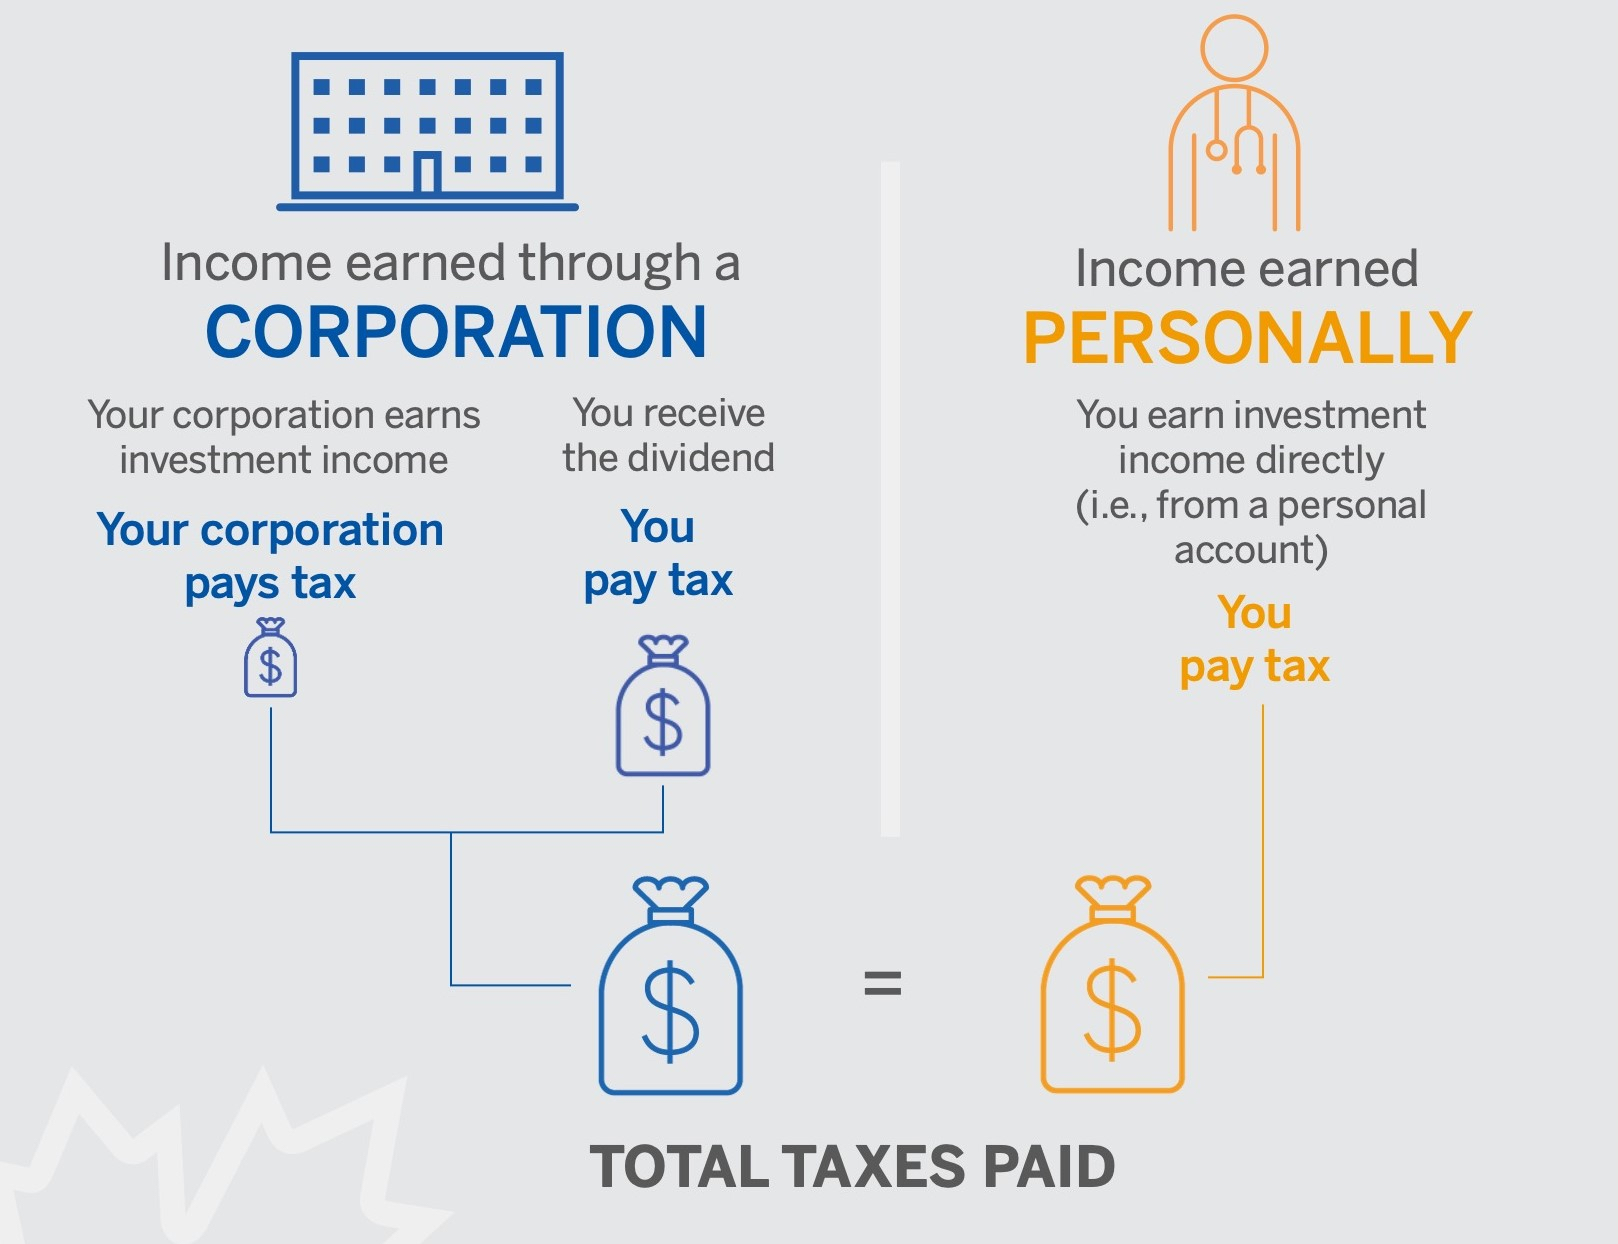 Illustration of income earned through a corporation and income earned personally, and how total taxes paid are the same